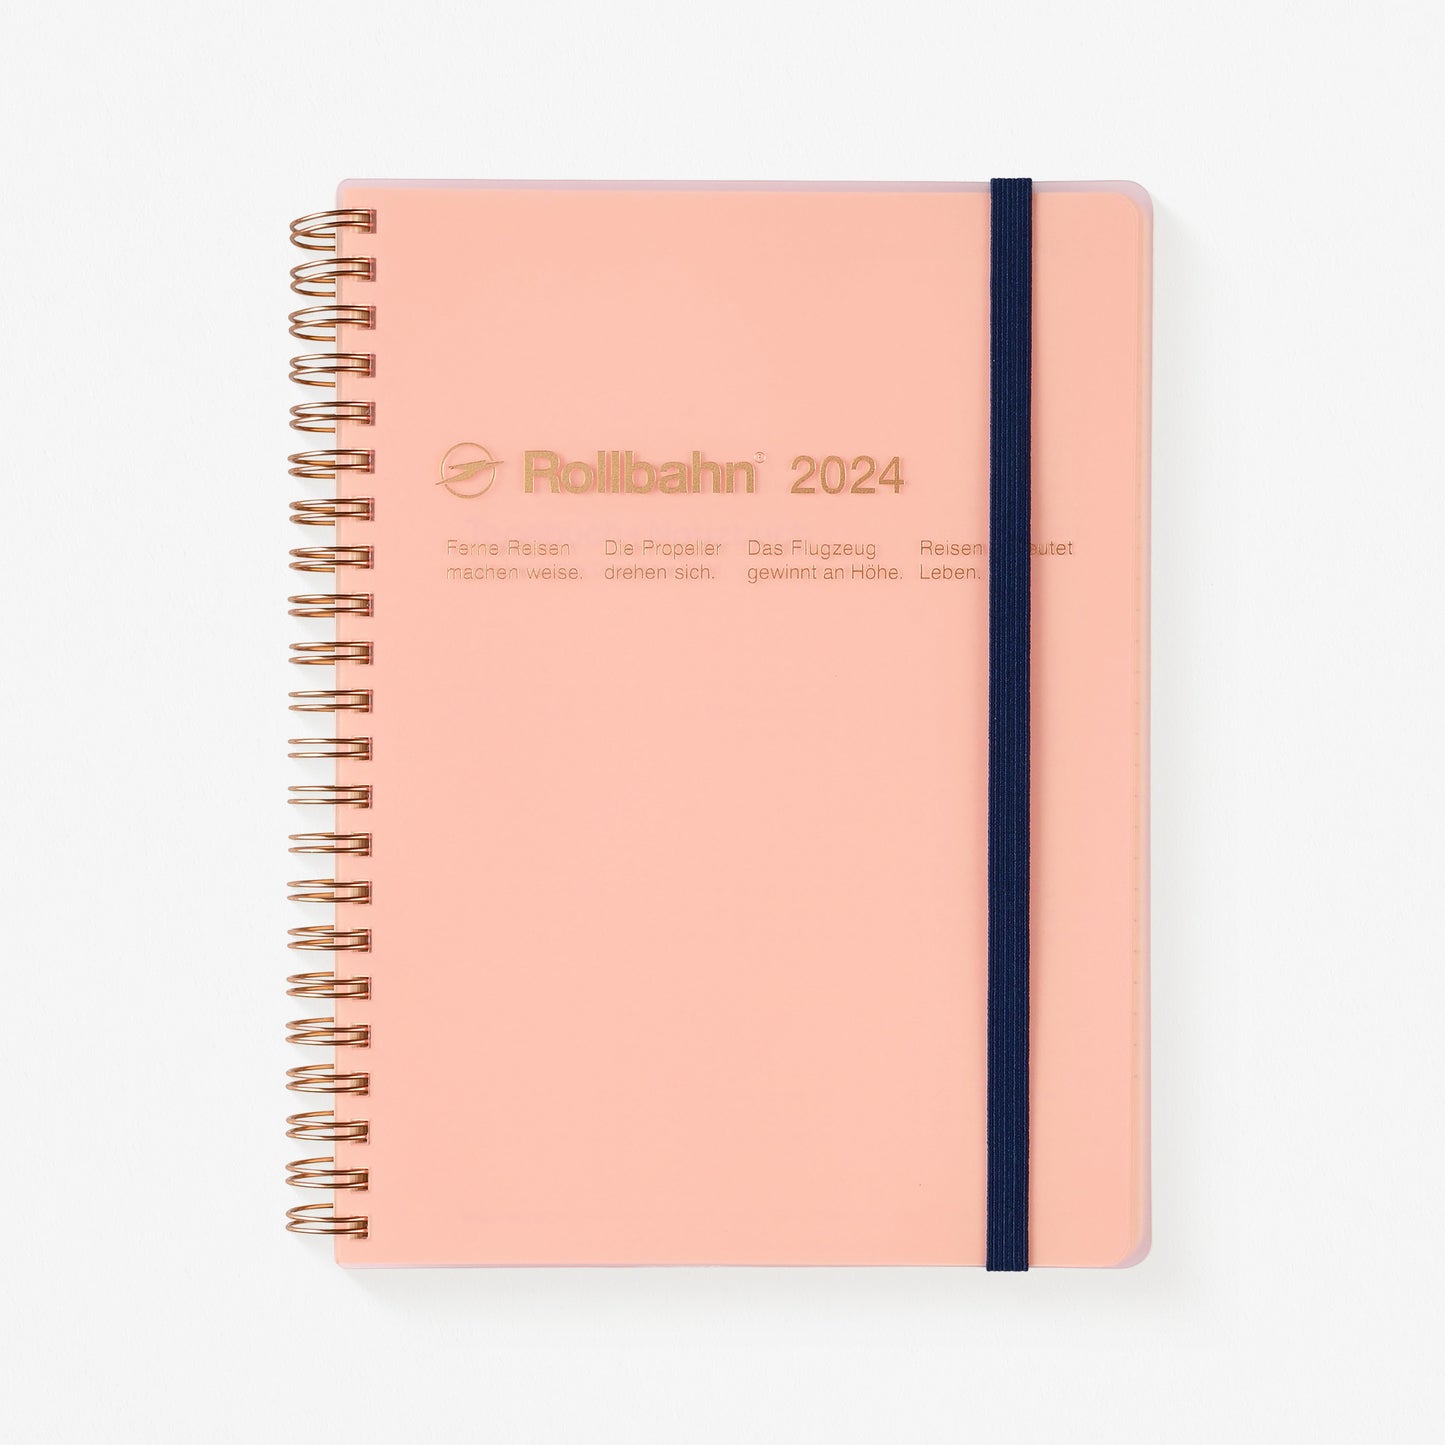 Delfonics Rollbahn 2024 Monthly Planner Clear Large Or A5 | Blue, Green, Silver Or Pink Clear Pink / Large [5.25 x 7"]